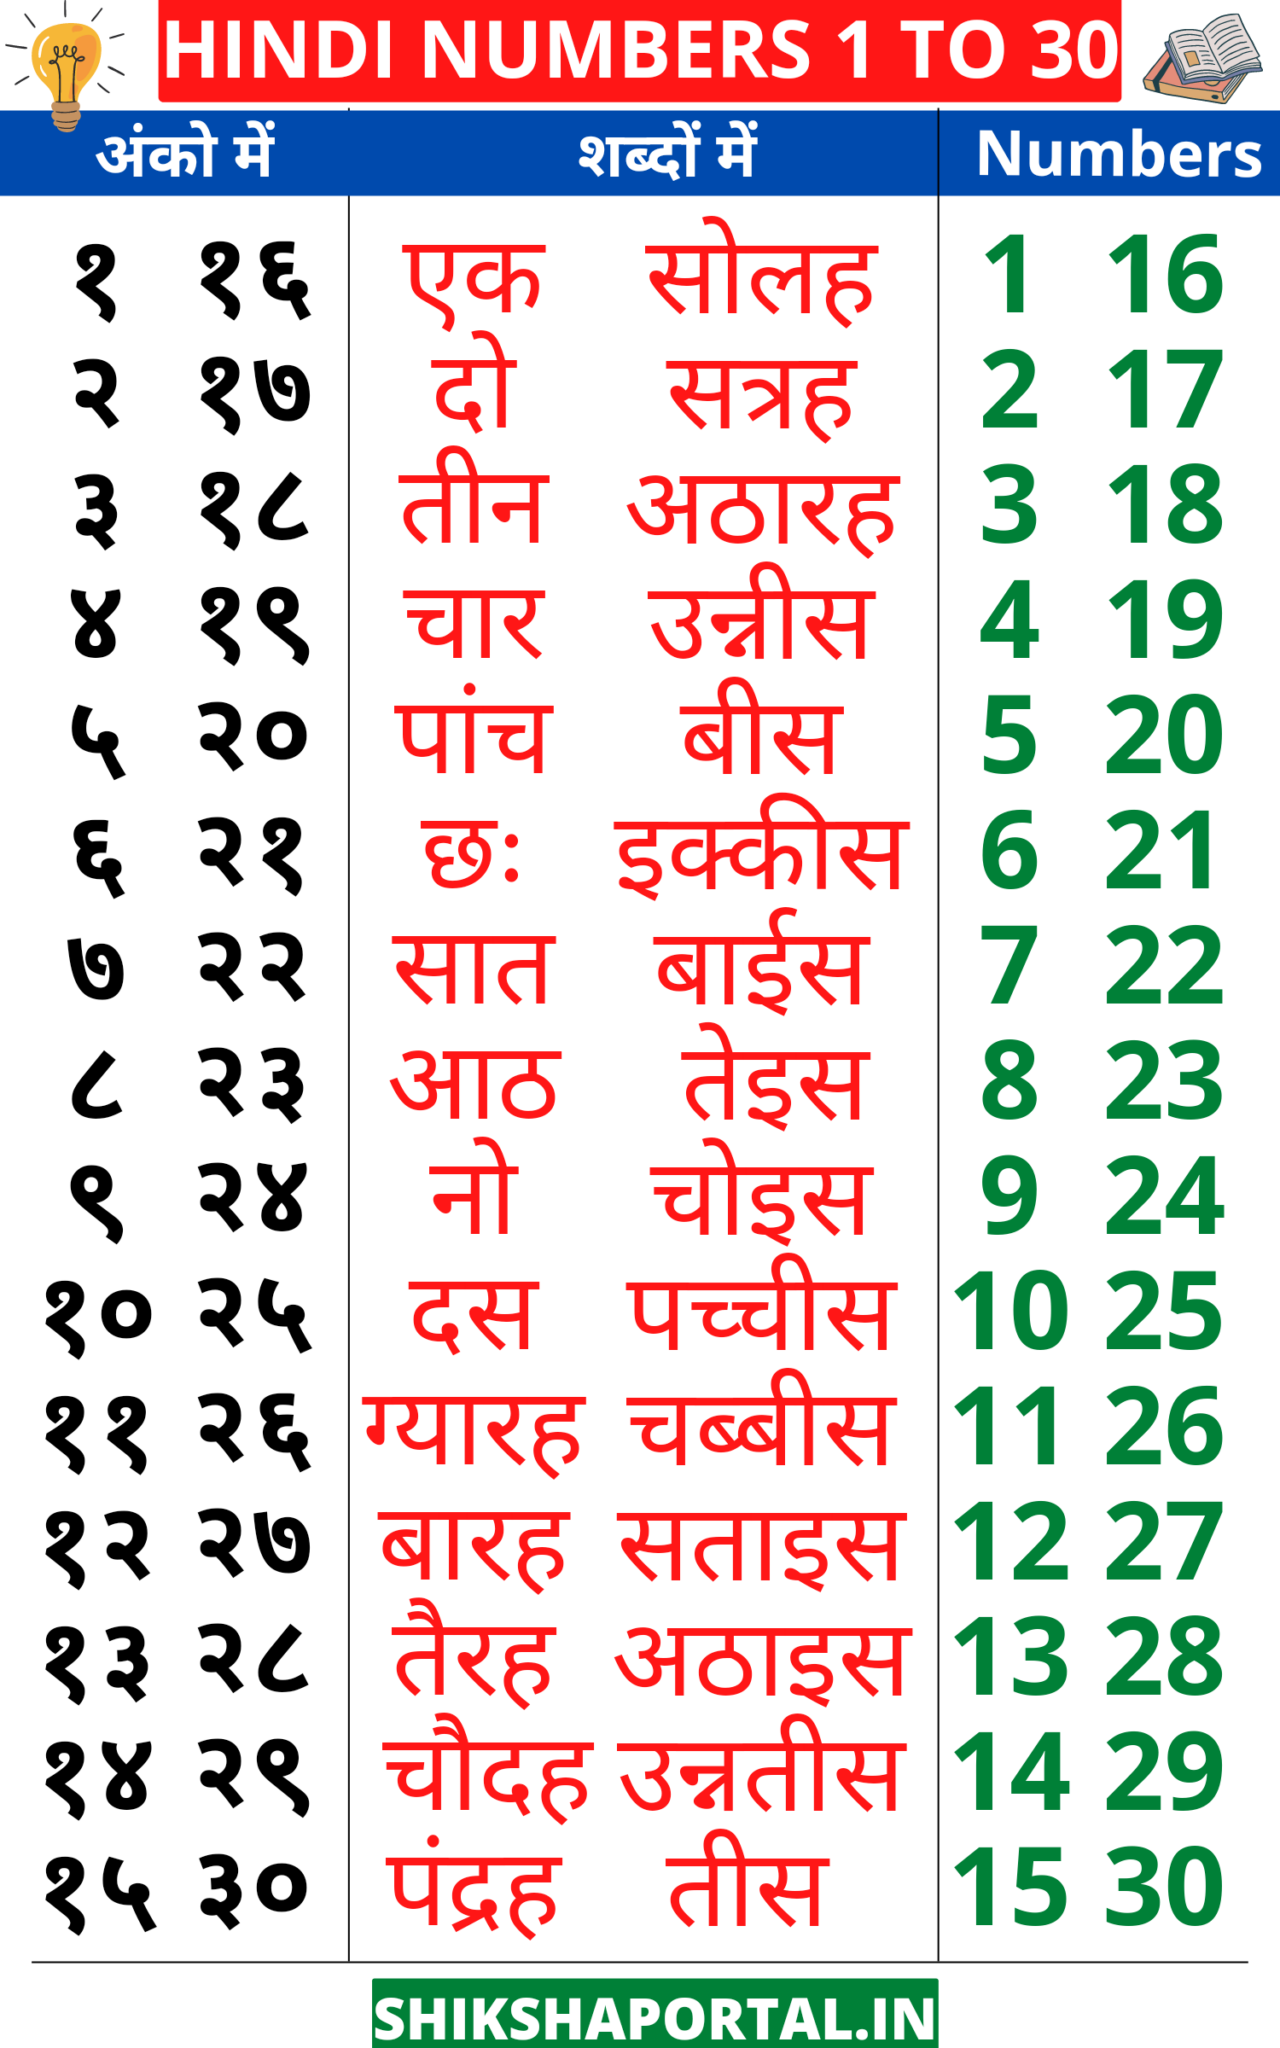 best-tricks-to-learn-hindi-numbers-1-to-30-1-30